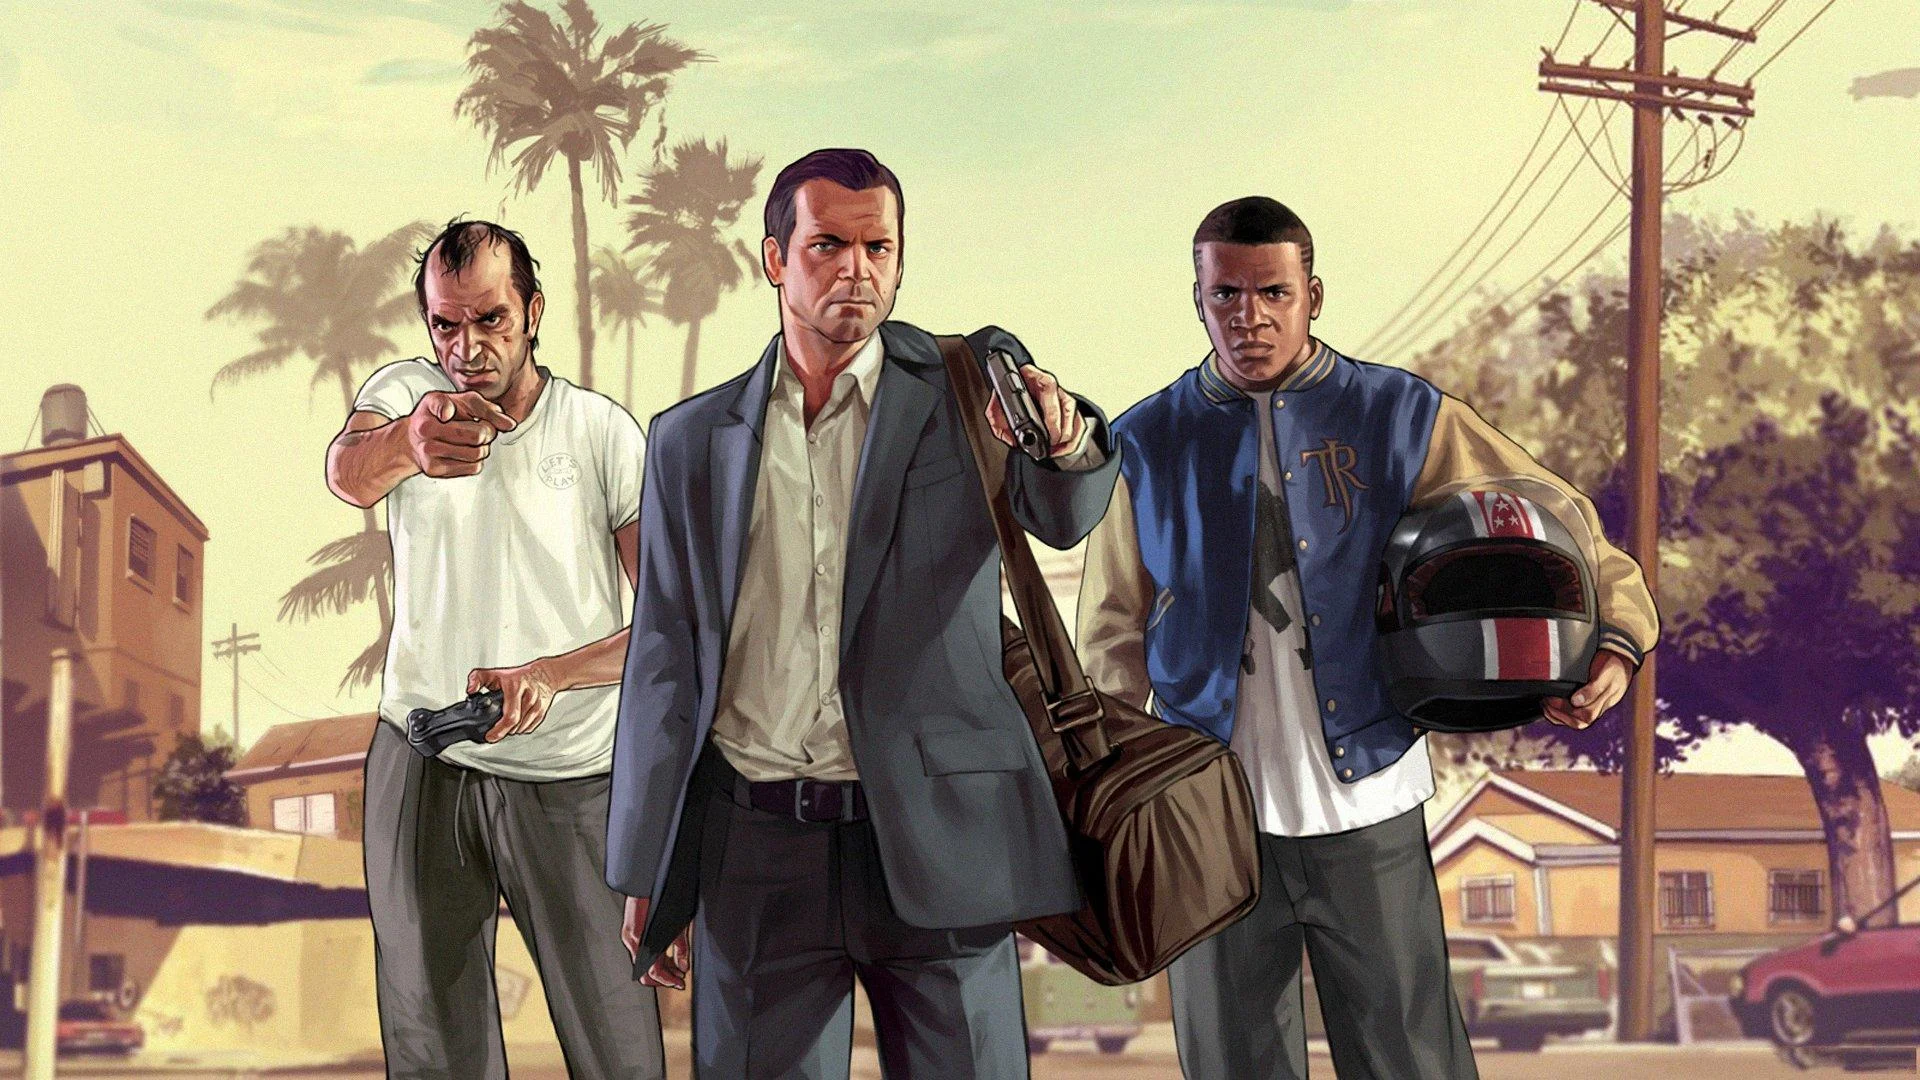 A documentary could be released about GTA 5. DLC could also be released for the game